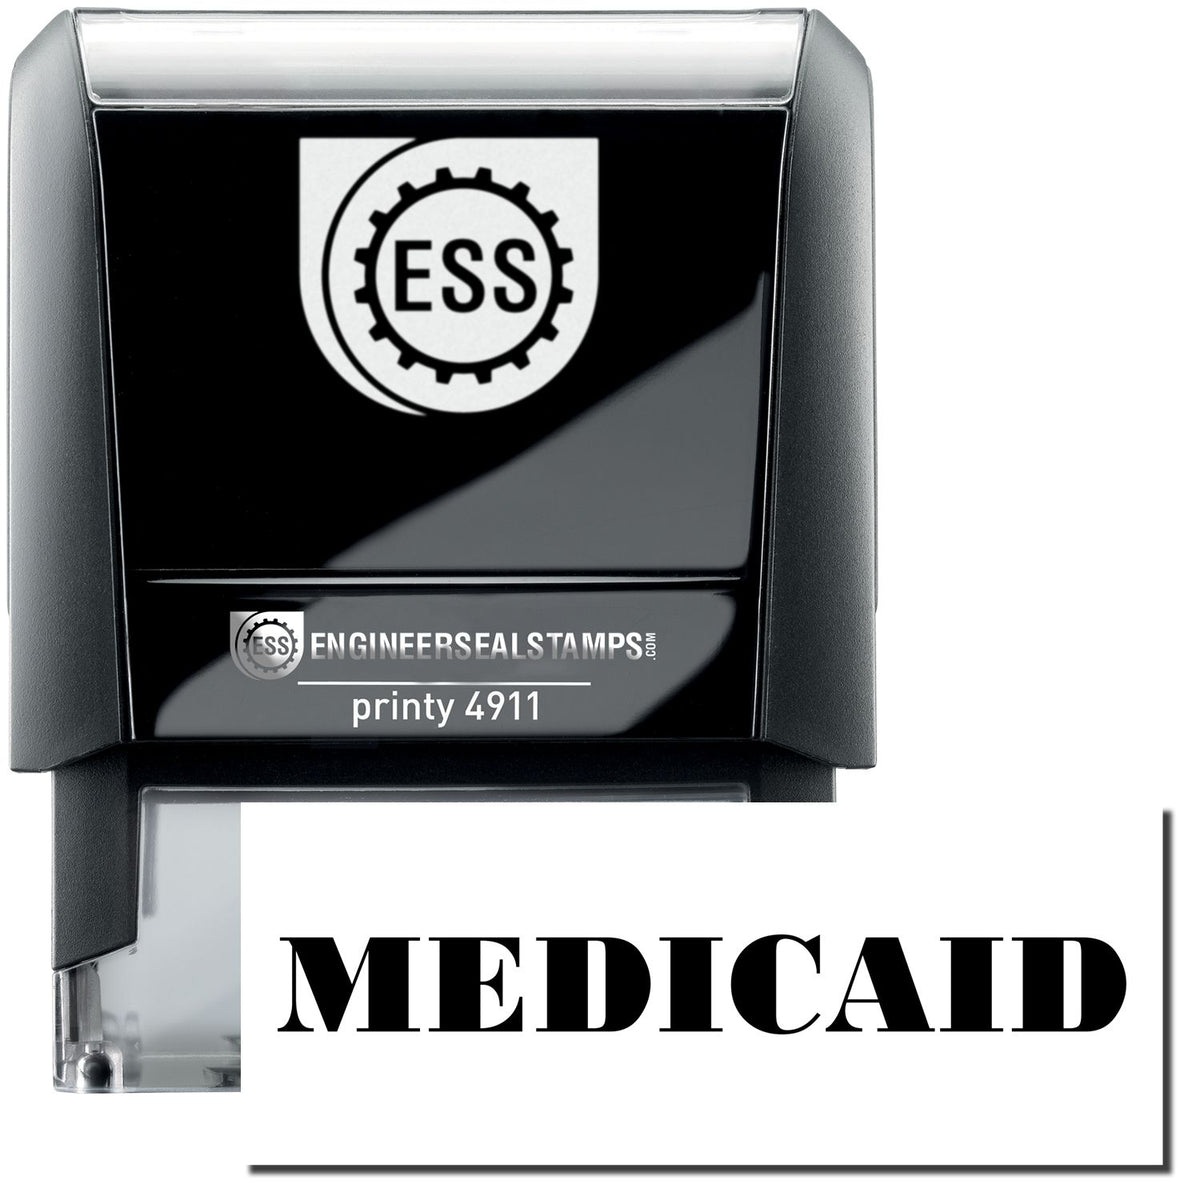 A self-inking stamp with a stamped image showing how the text &quot;MEDICAID&quot; is displayed after stamping.